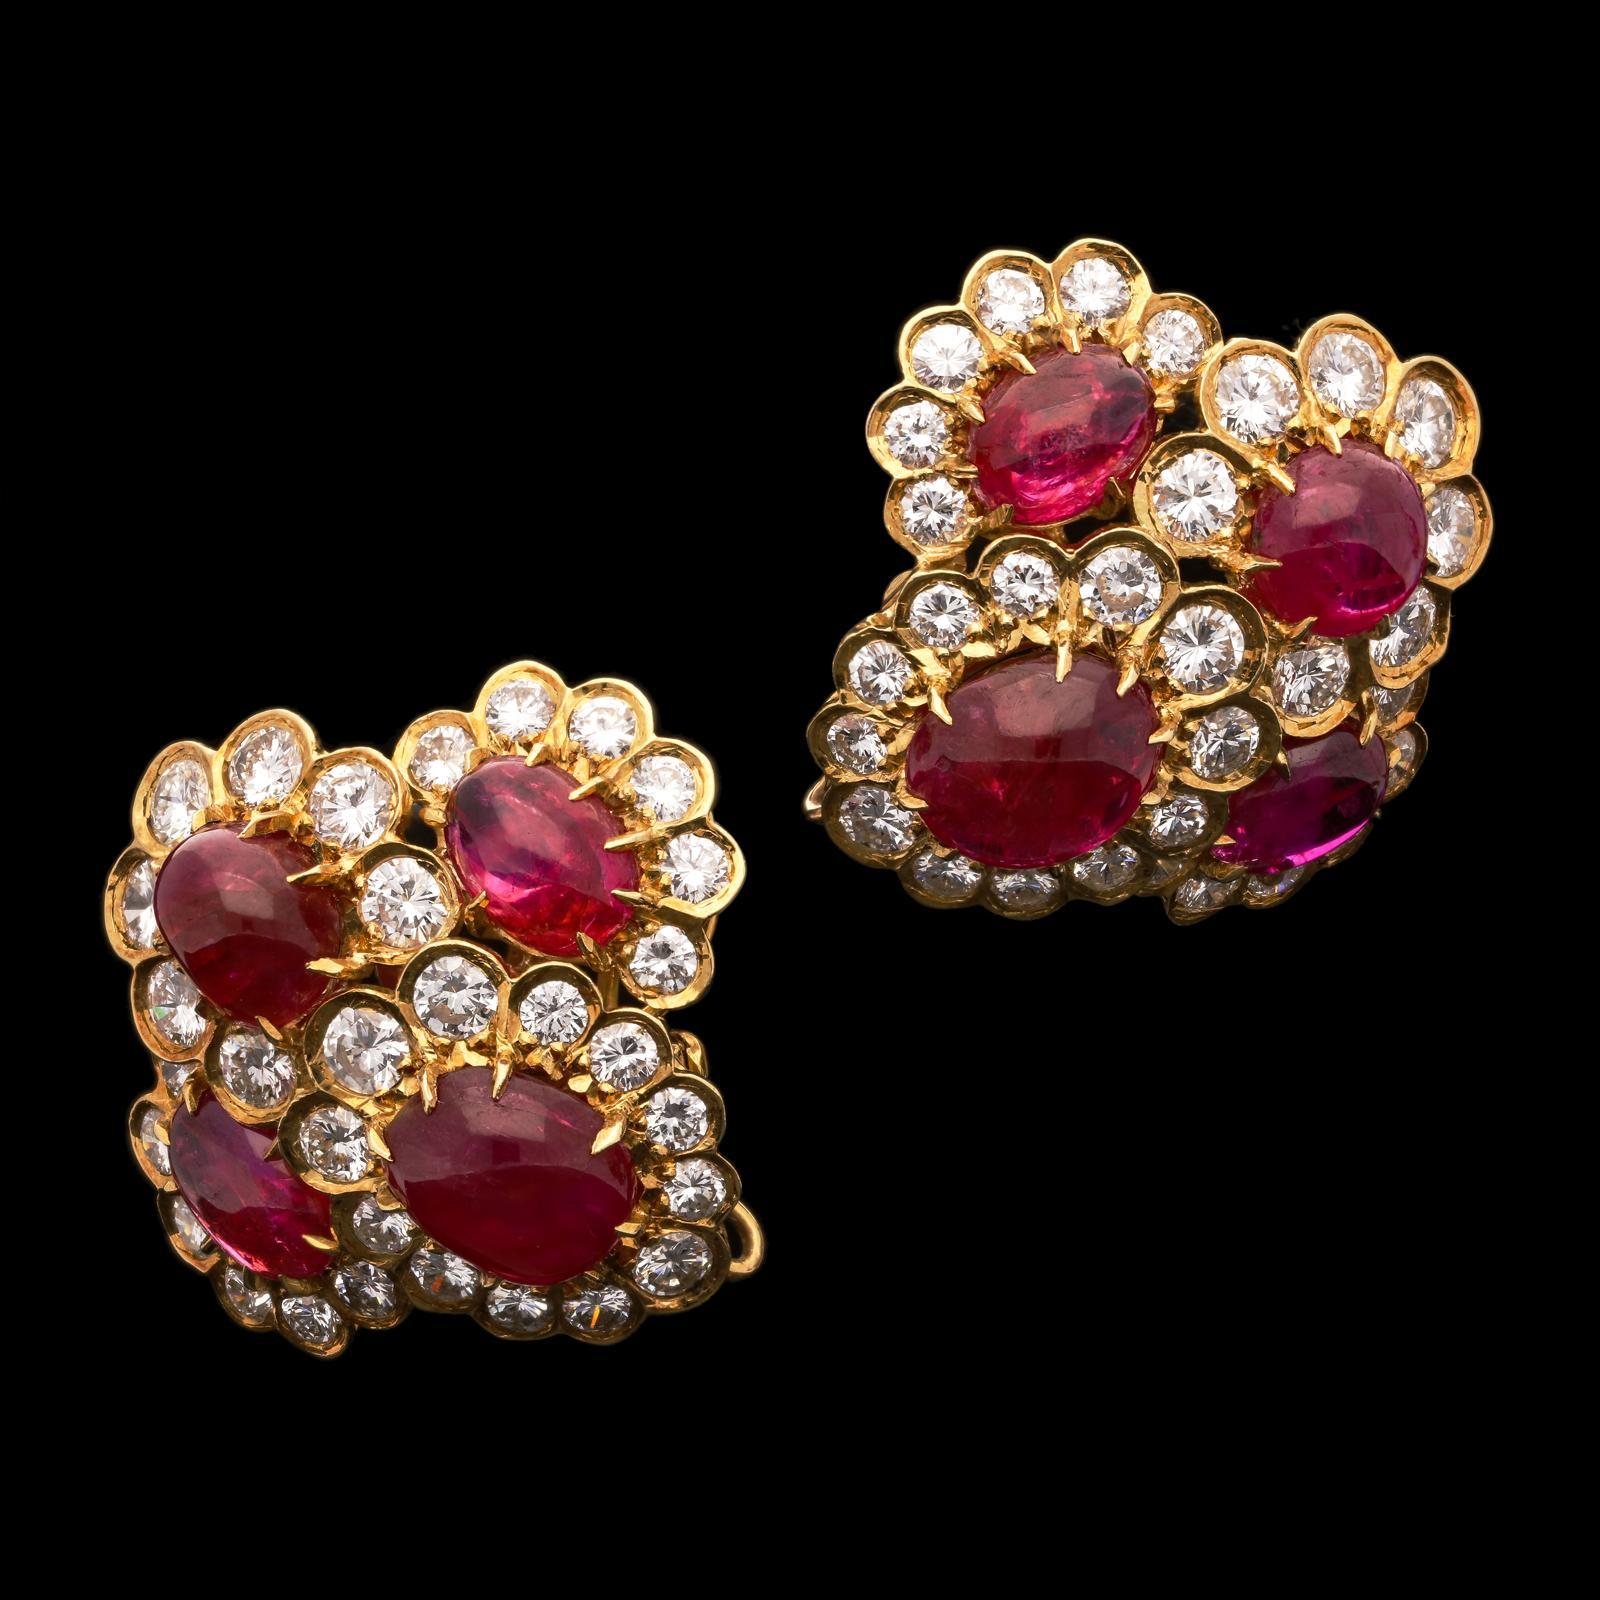 Description
A fabulous pair of vintage Burmese ruby and diamond ear clips by Van Cleef & Arpels c.1972, each designed as a quadruple cluster of oval ruby cabochons in 18ct yellow gold claw settings surrounded by round brilliant cut diamonds in bezel